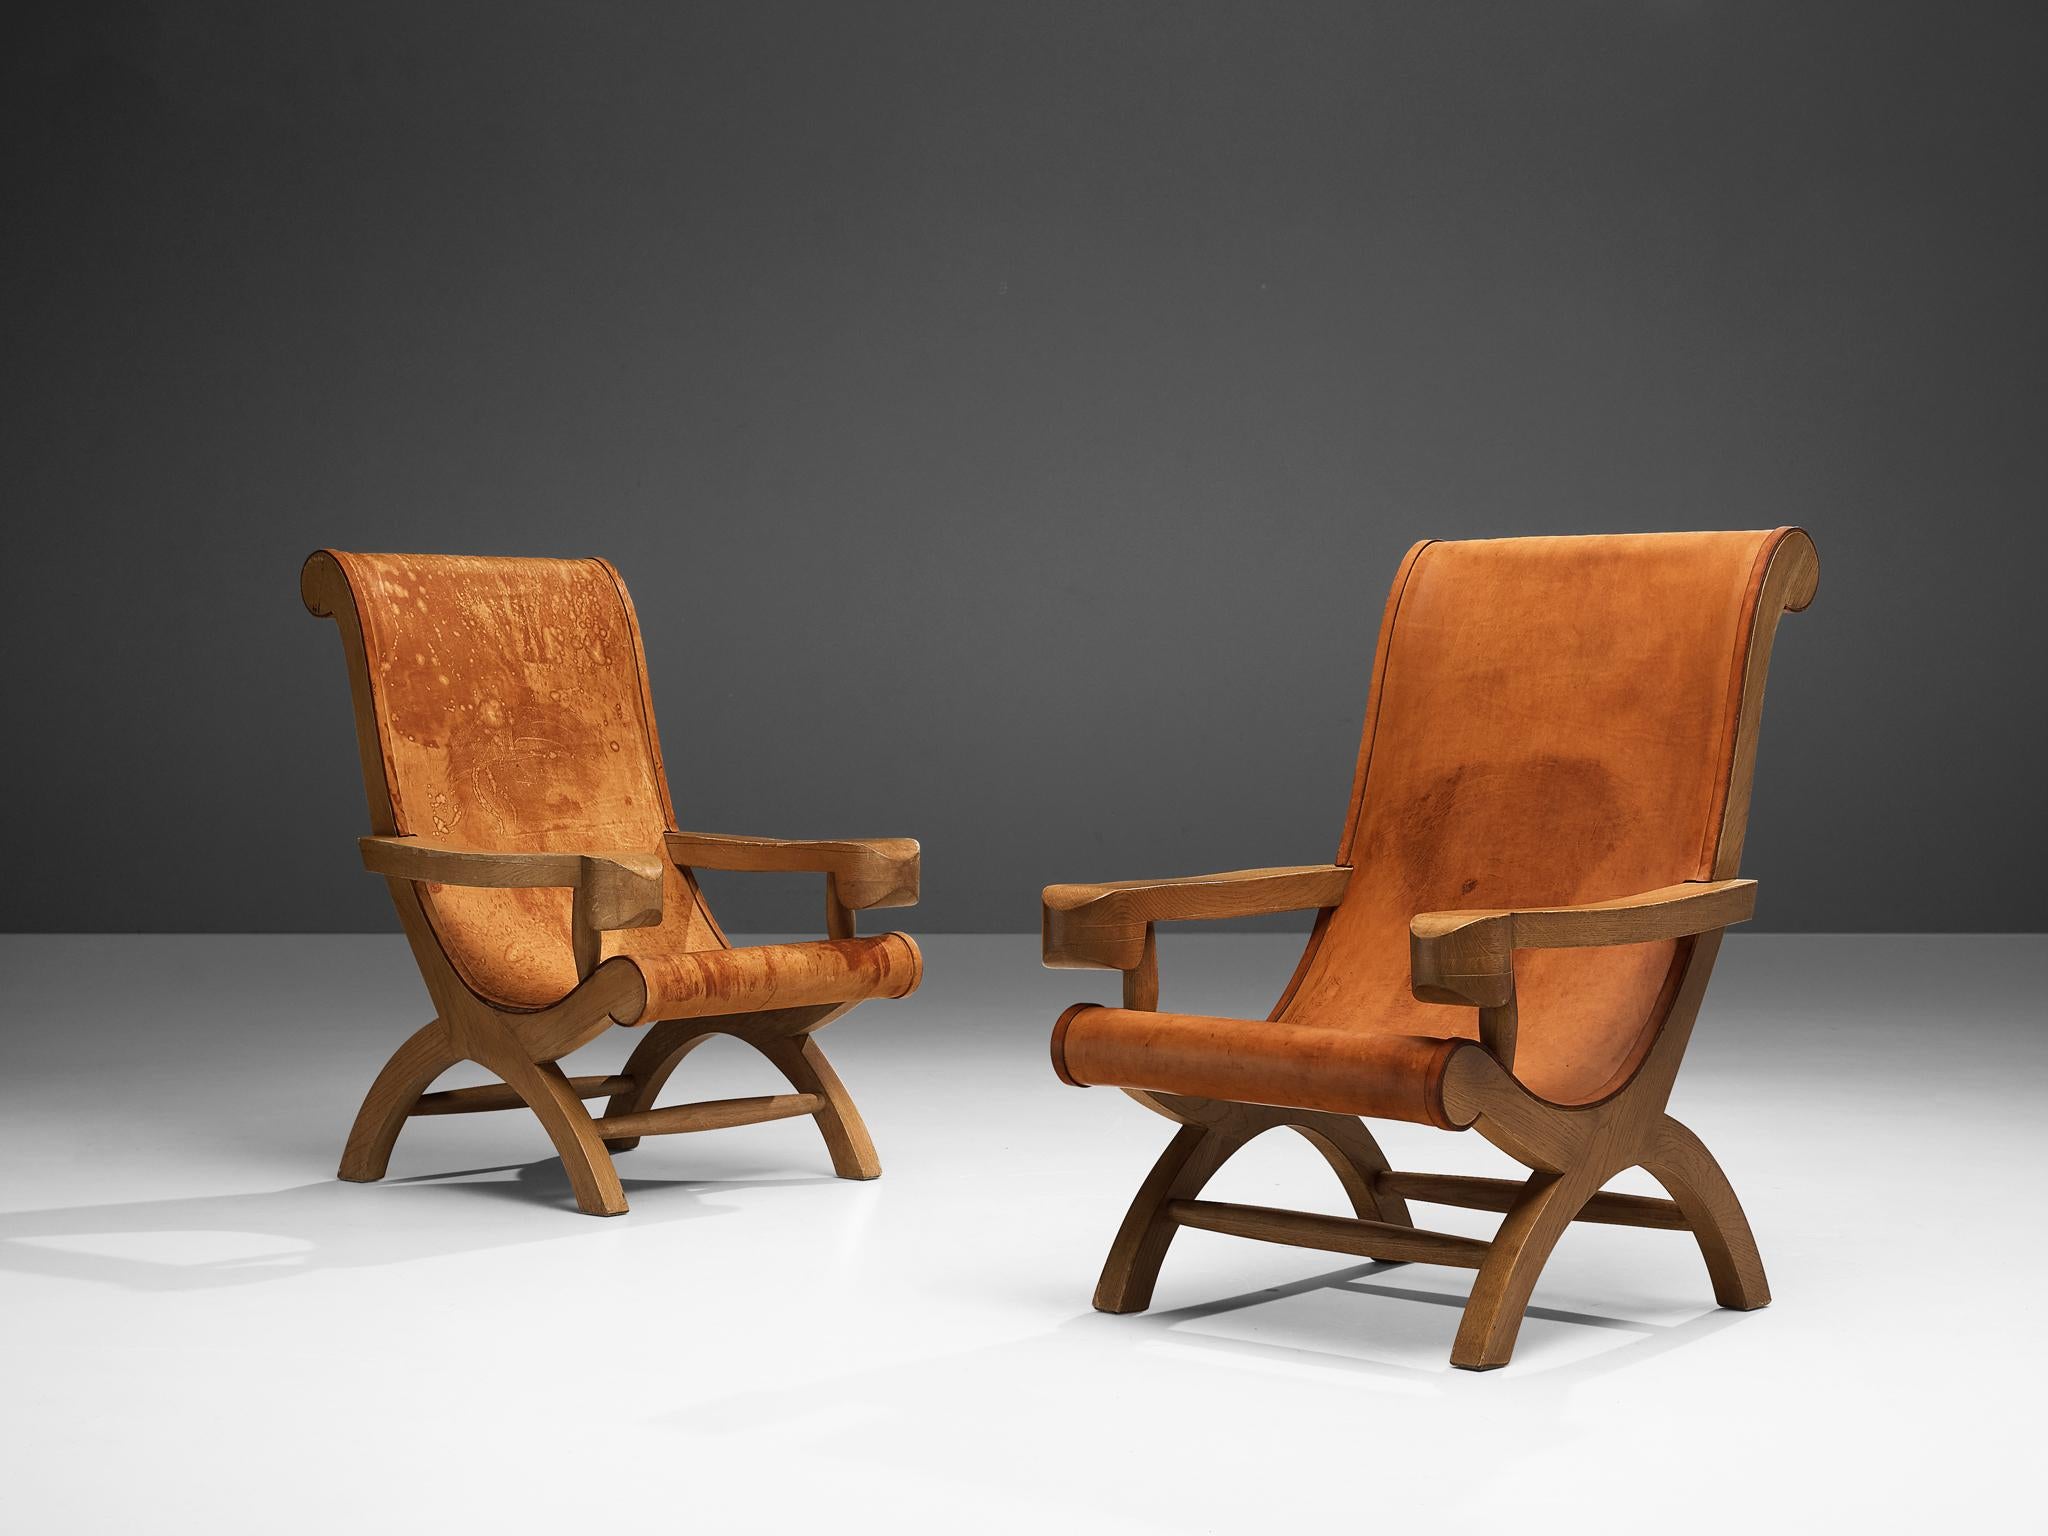 Attributed to Clara Porset, armchairs 'Butaque', patinated leather, cypress wood, Mexico, circa 1947

Wonderful ‘Butaque’ armchair attributed to Clara Porset. It features a strong resemblance to Porset’s lounge chair ‘Butaque’ without armrests.